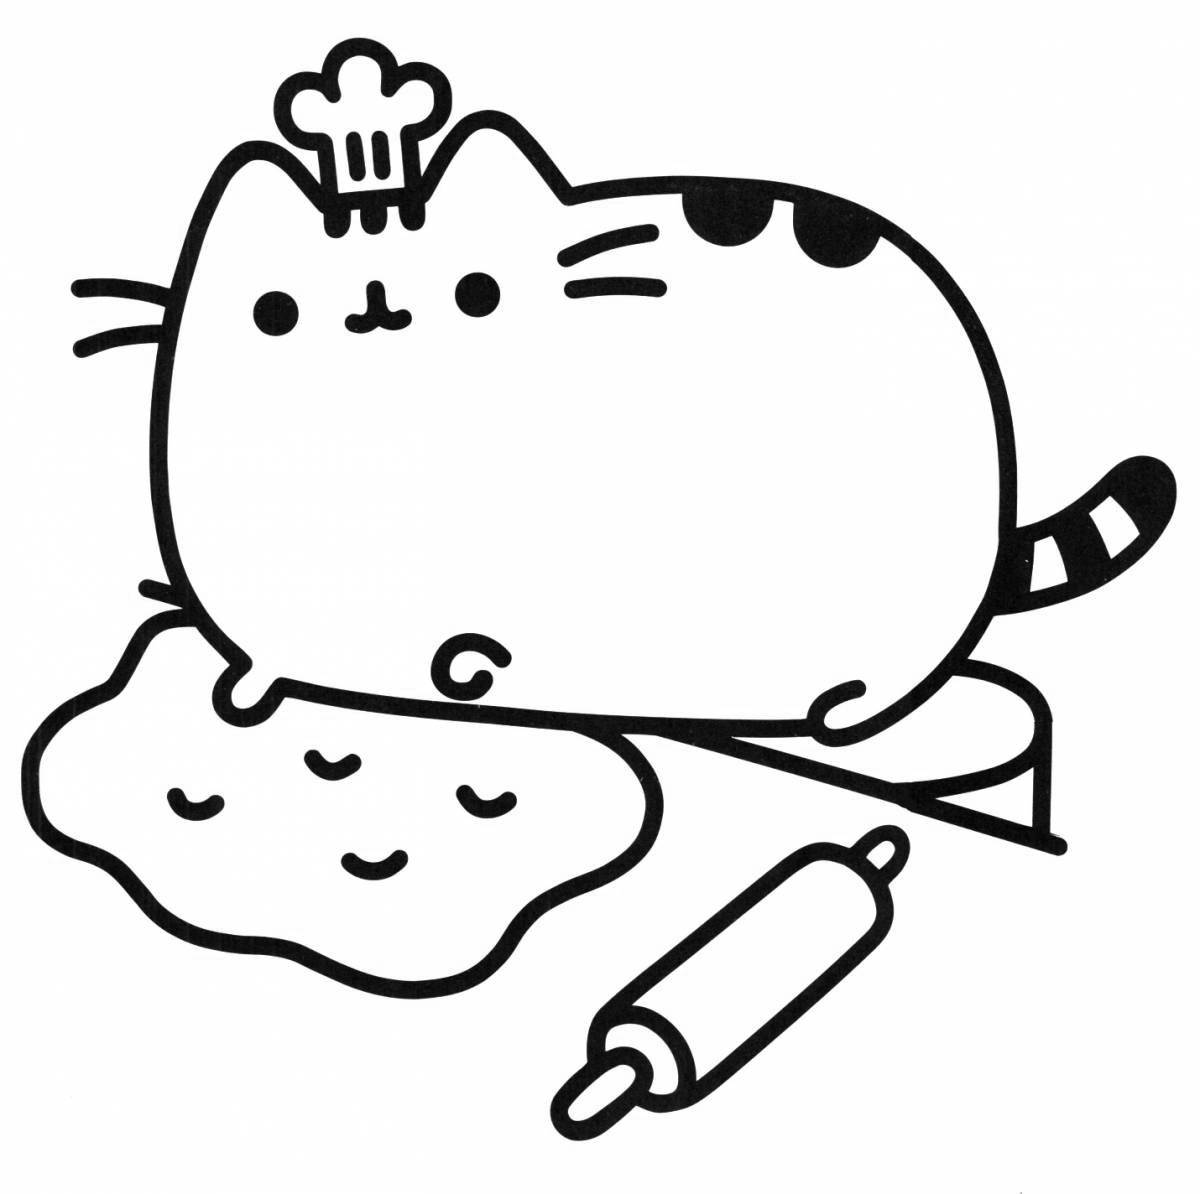 Coloring page adorable chubby cat